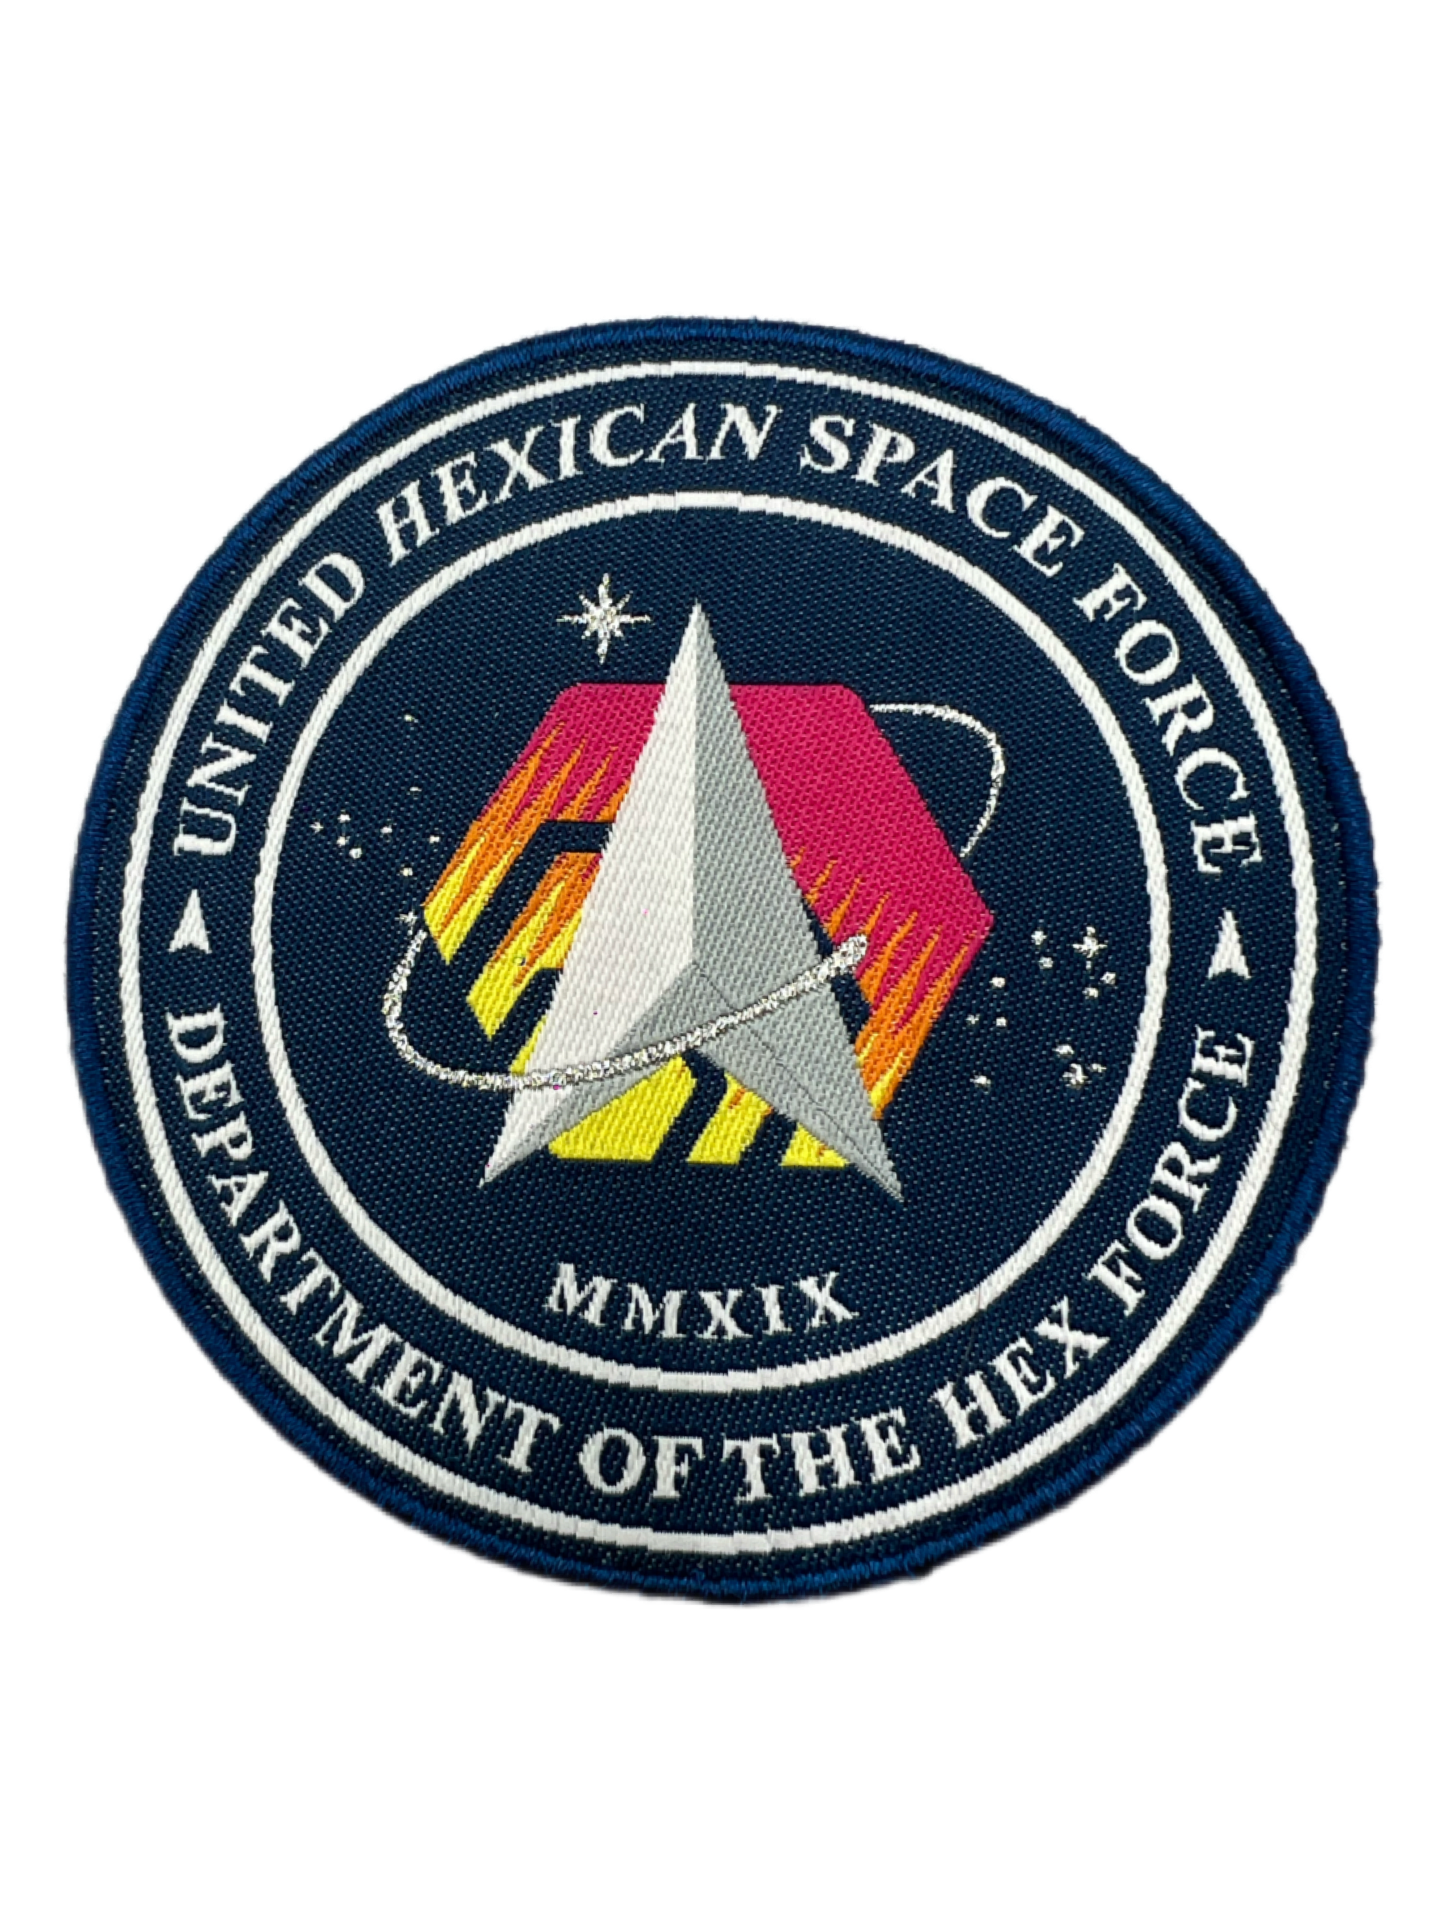 Hexican Space Force Patch